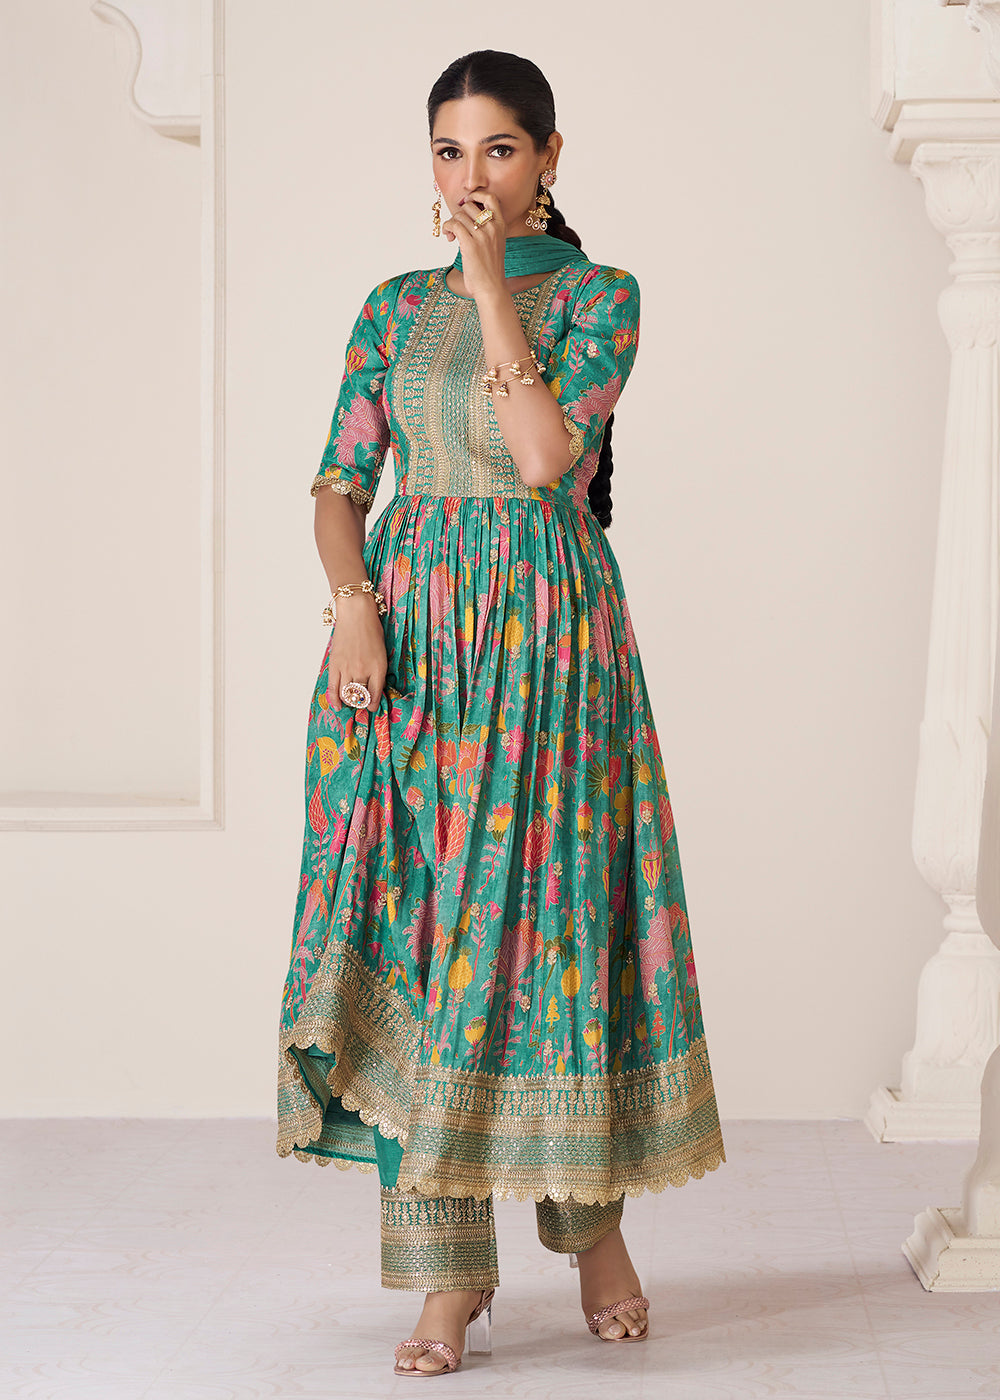 Buy Now Floral Printed Green Premium Organza Silk Anarkali Suit Online in USA, UK, Australia, New Zealand, Canada & Worldwide at Empress Clothing. 